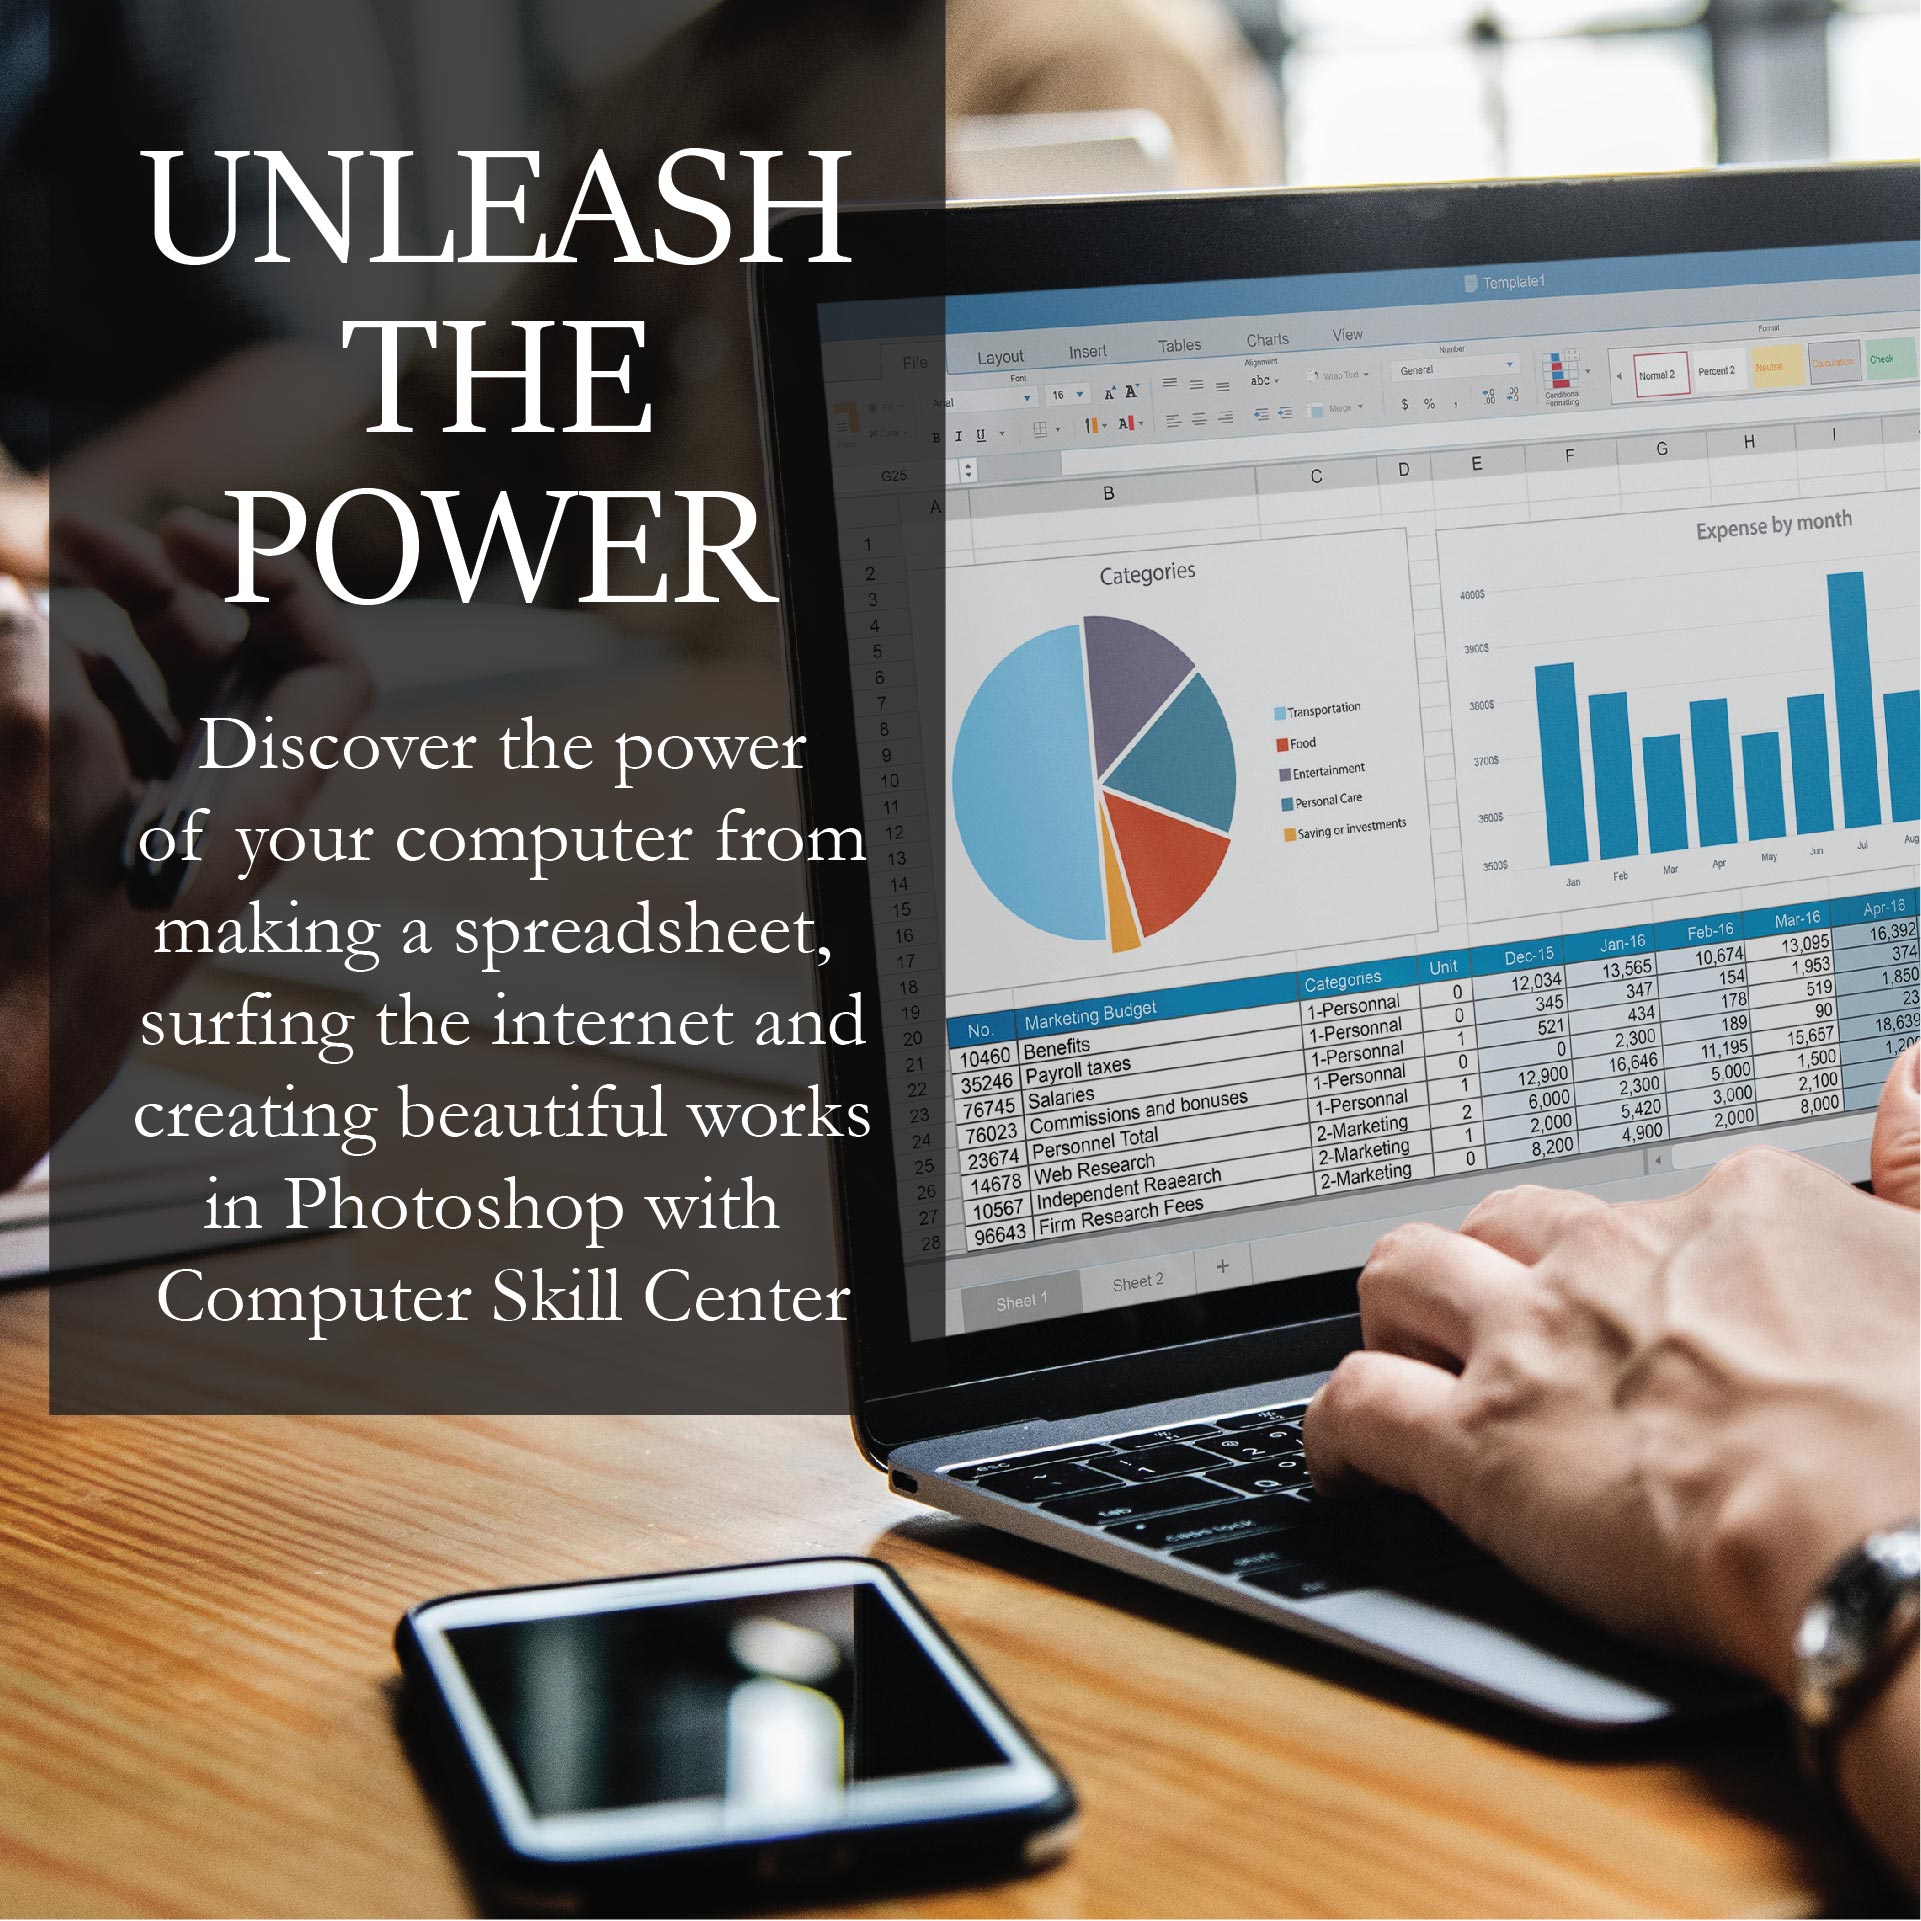 Unleash the Power - Discover the power of your computer from making a spreadsheet, surfing the internet and creating beautiful works in Photoshop with Computer Skill Center